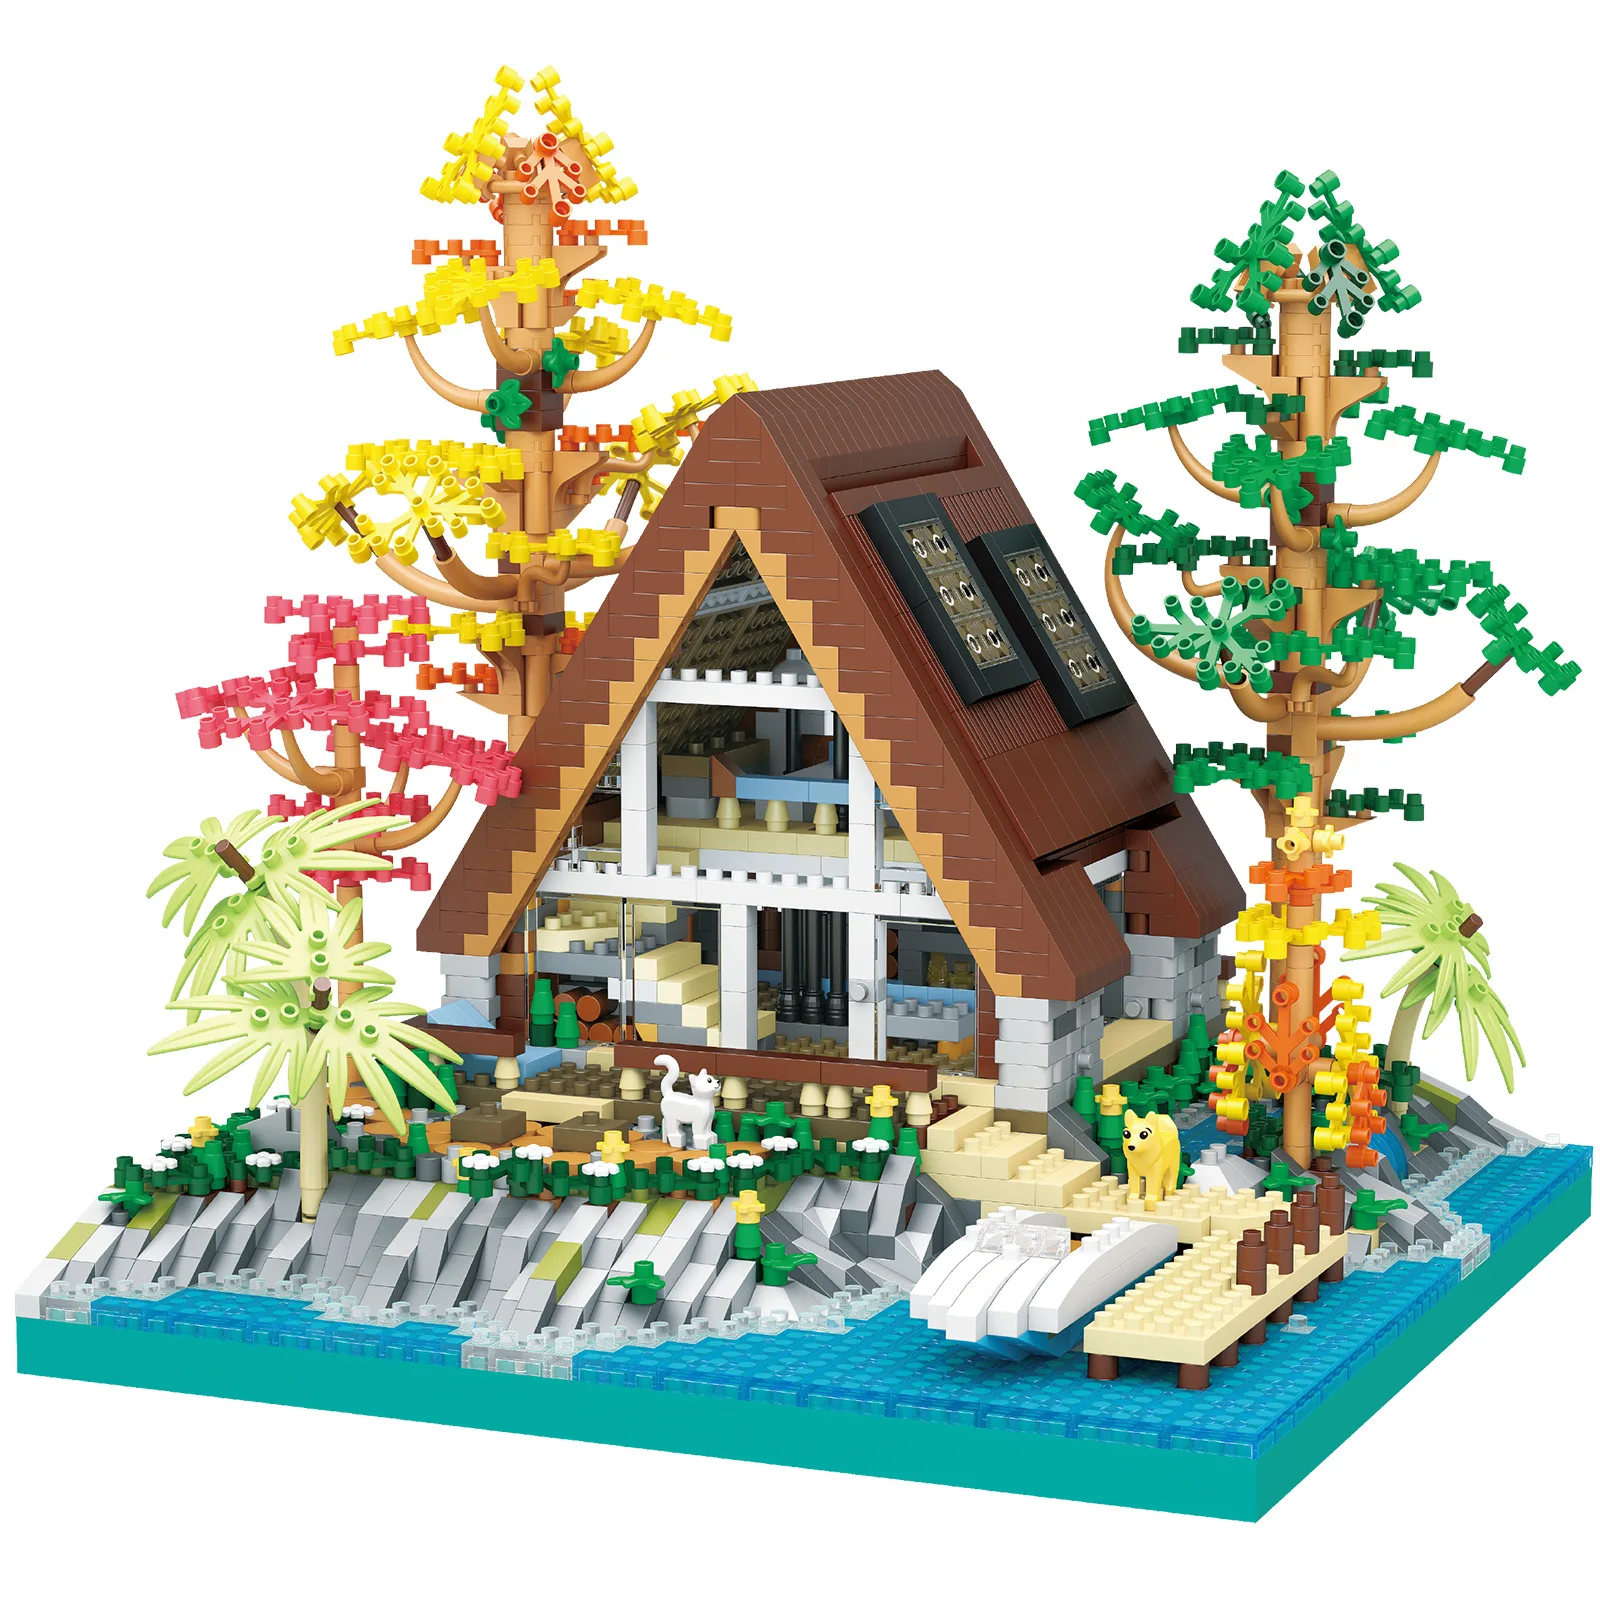 Creative City Street View House Micro Diamond Block Lakeside Cabin Streetscape Model Building Brick Figures Toy For Kids Gifts city street view building blocks friends for girl sakura tree bricks creator cherry blossom tree house model building kit toy